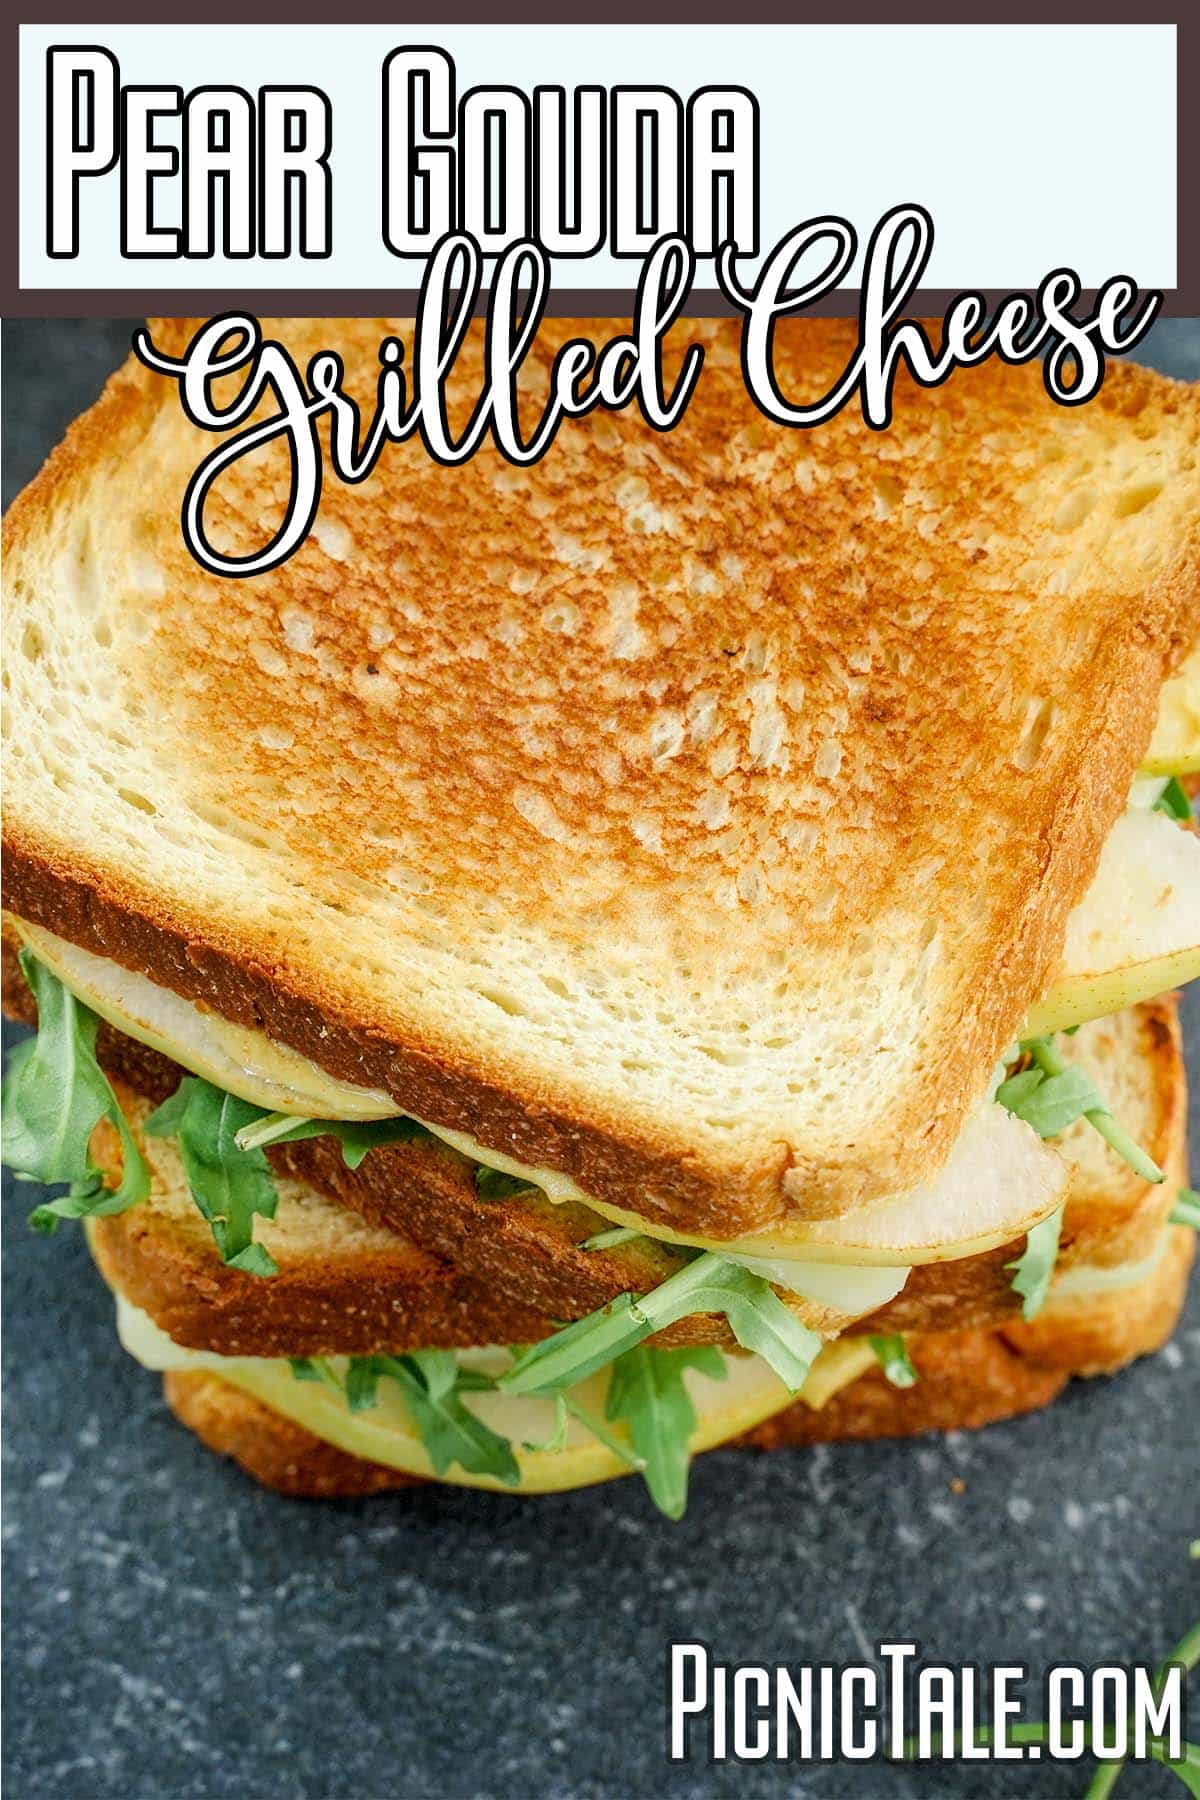 Pear Gouda Grilled Cheese, top view wording on top.